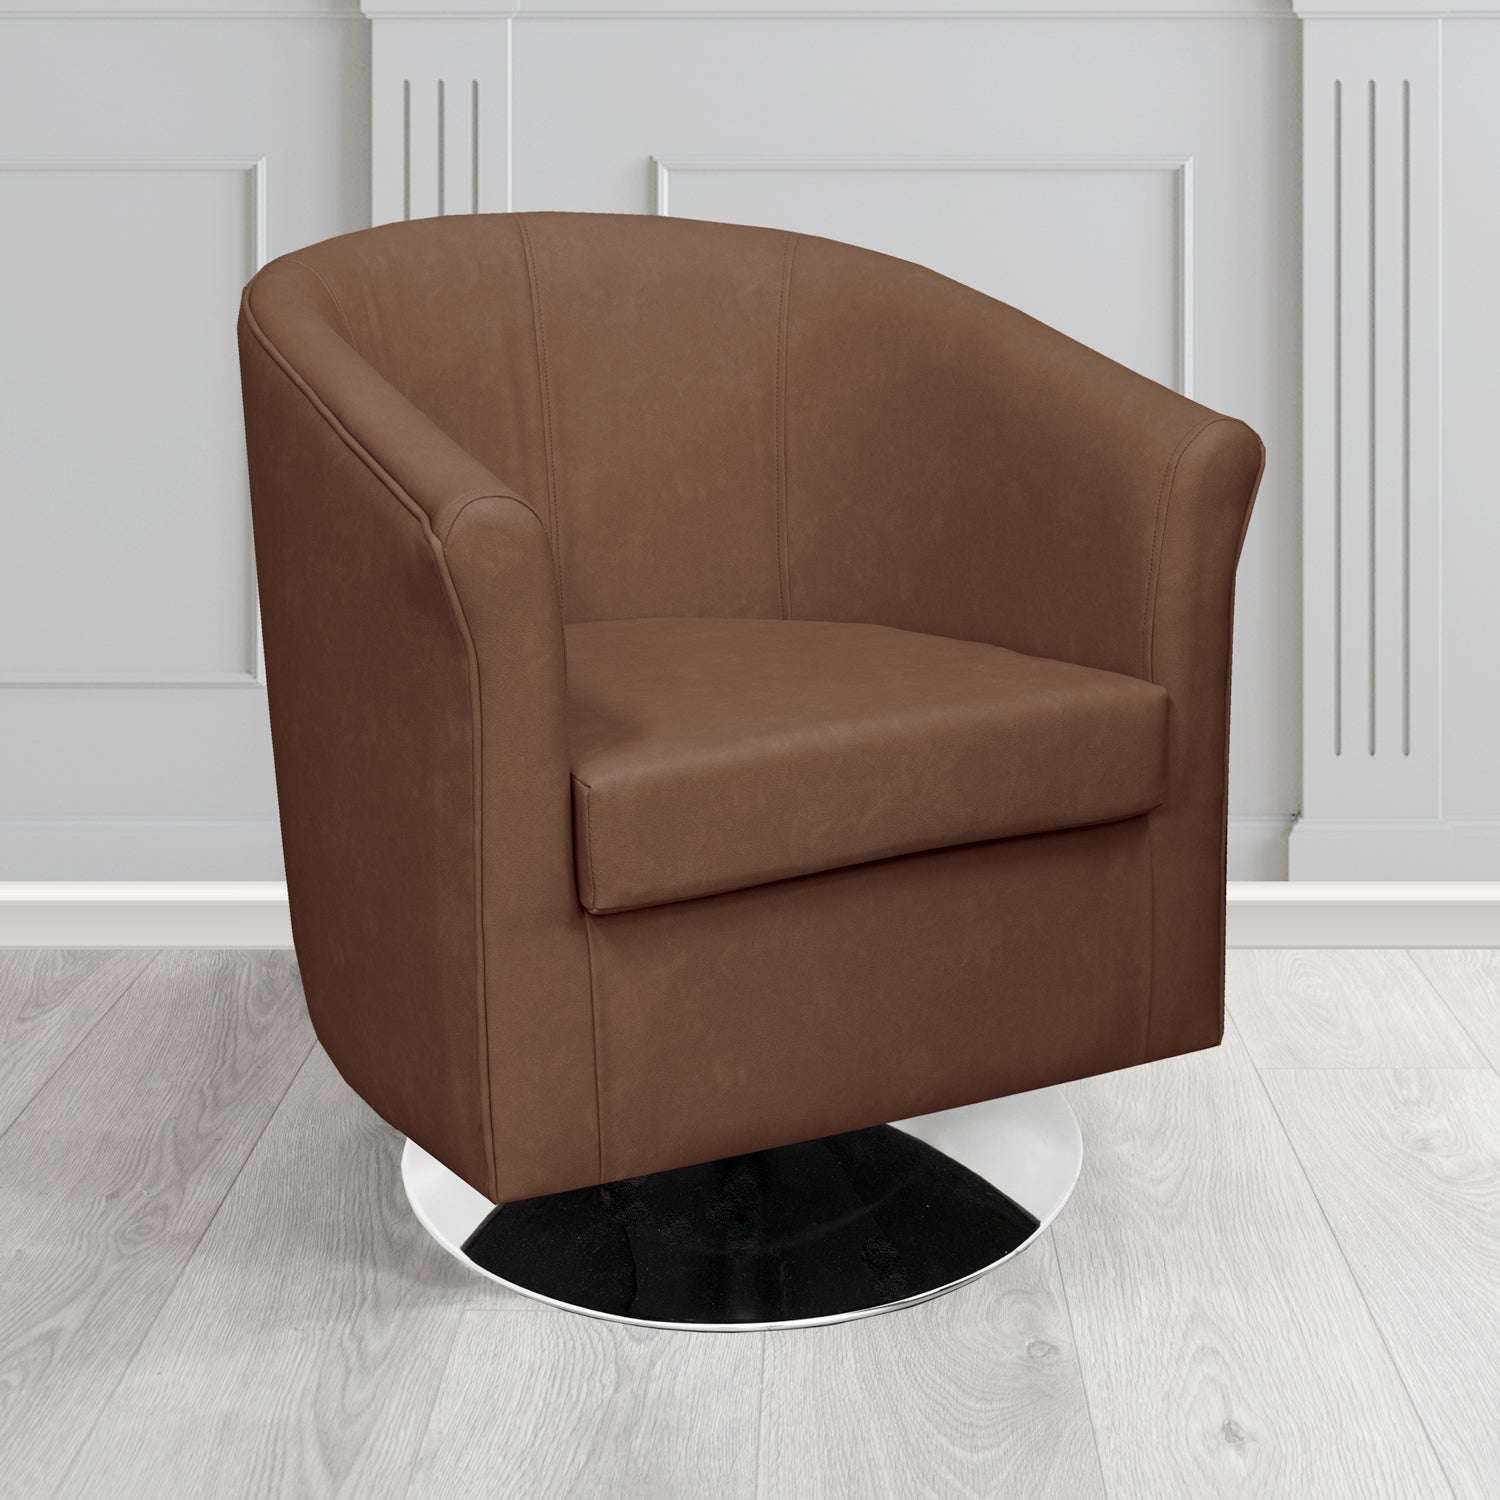 Tuscany Swivel Tub Chair in Infiniti Tan INF1850 Antimicrobial Crib 5 Faux Leather - The Tub Chair Shop